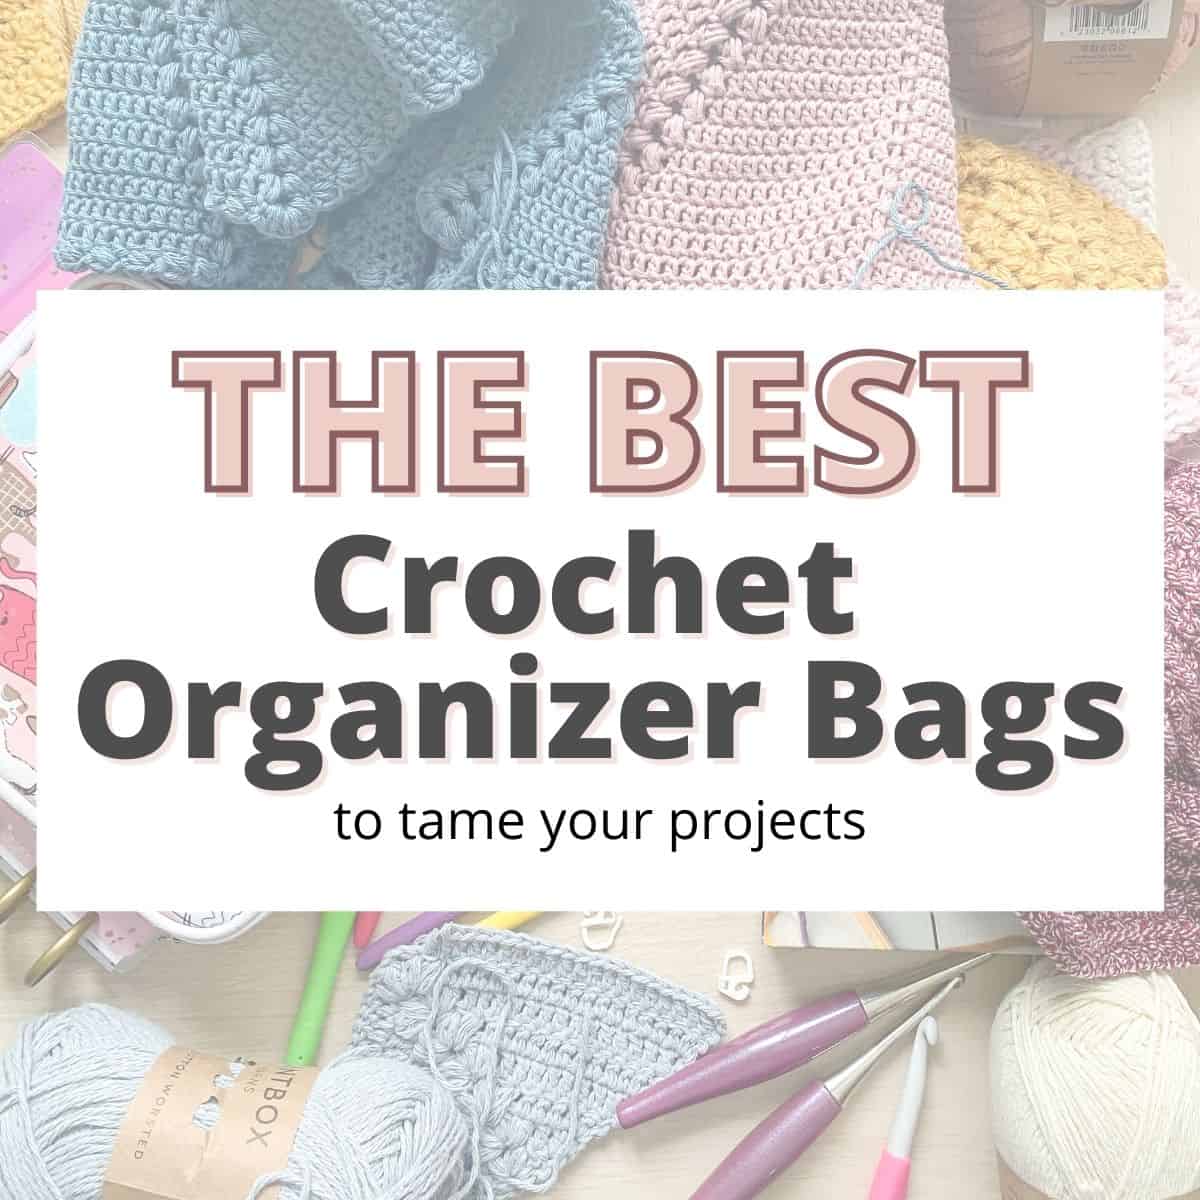 Project bags